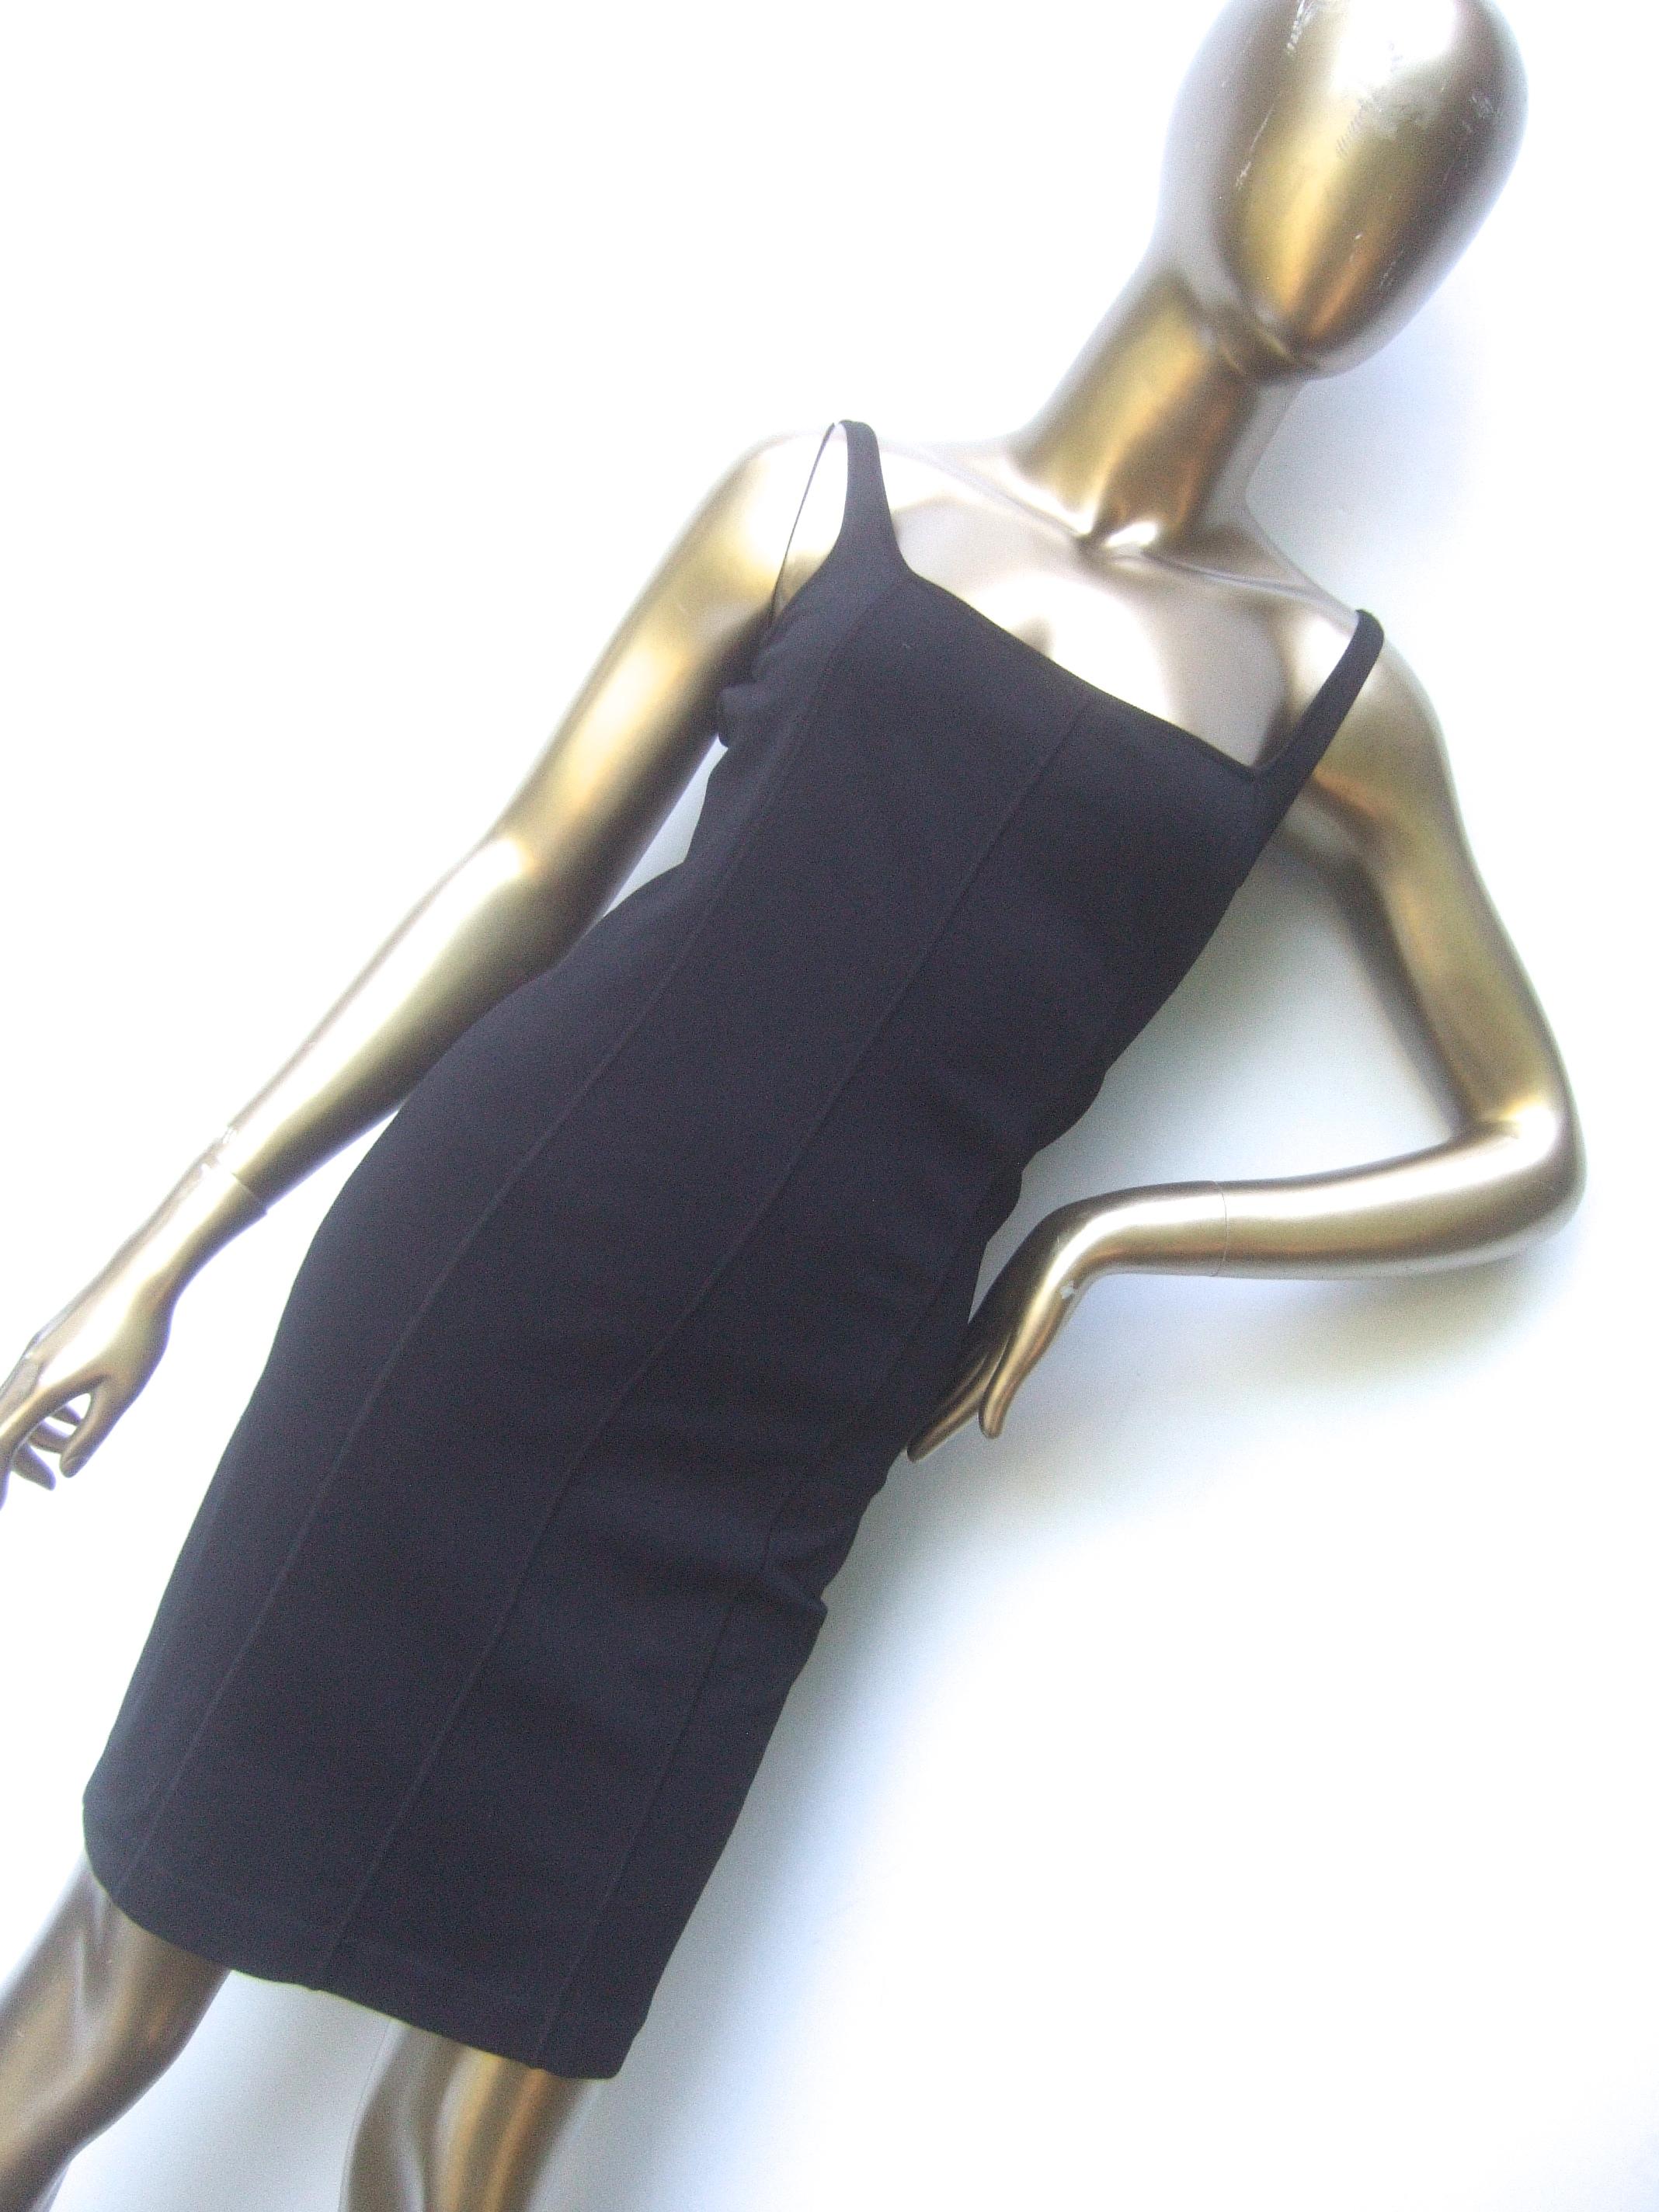 Gucci Italy Chic Black Stretch Knit Tank Dress Tom Ford Era c 1990s In Good Condition For Sale In University City, MO